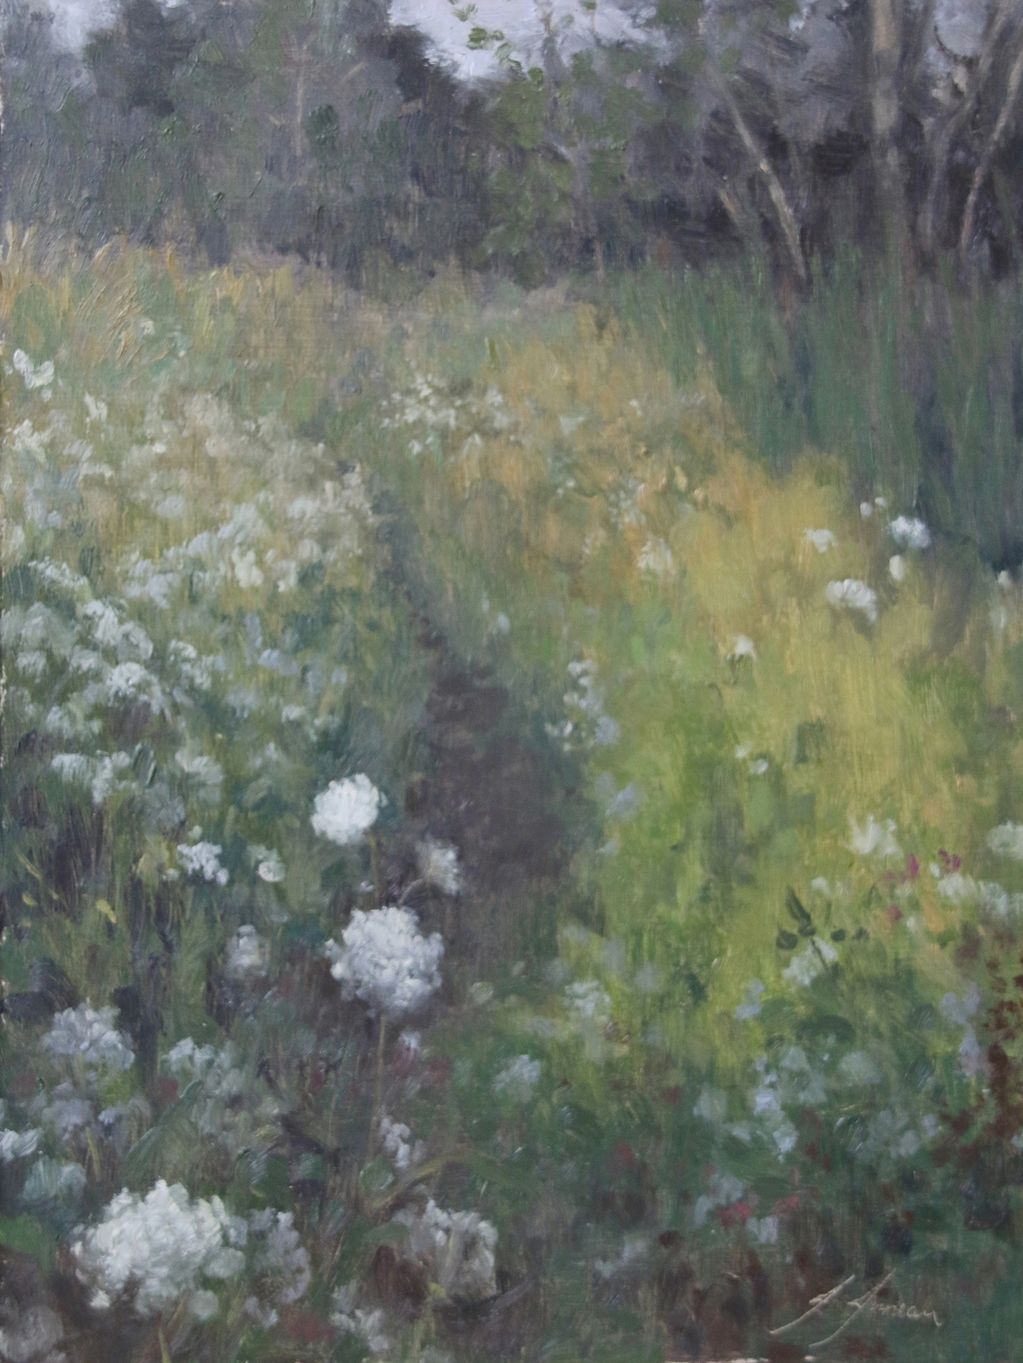 Painting of a path with white flowers